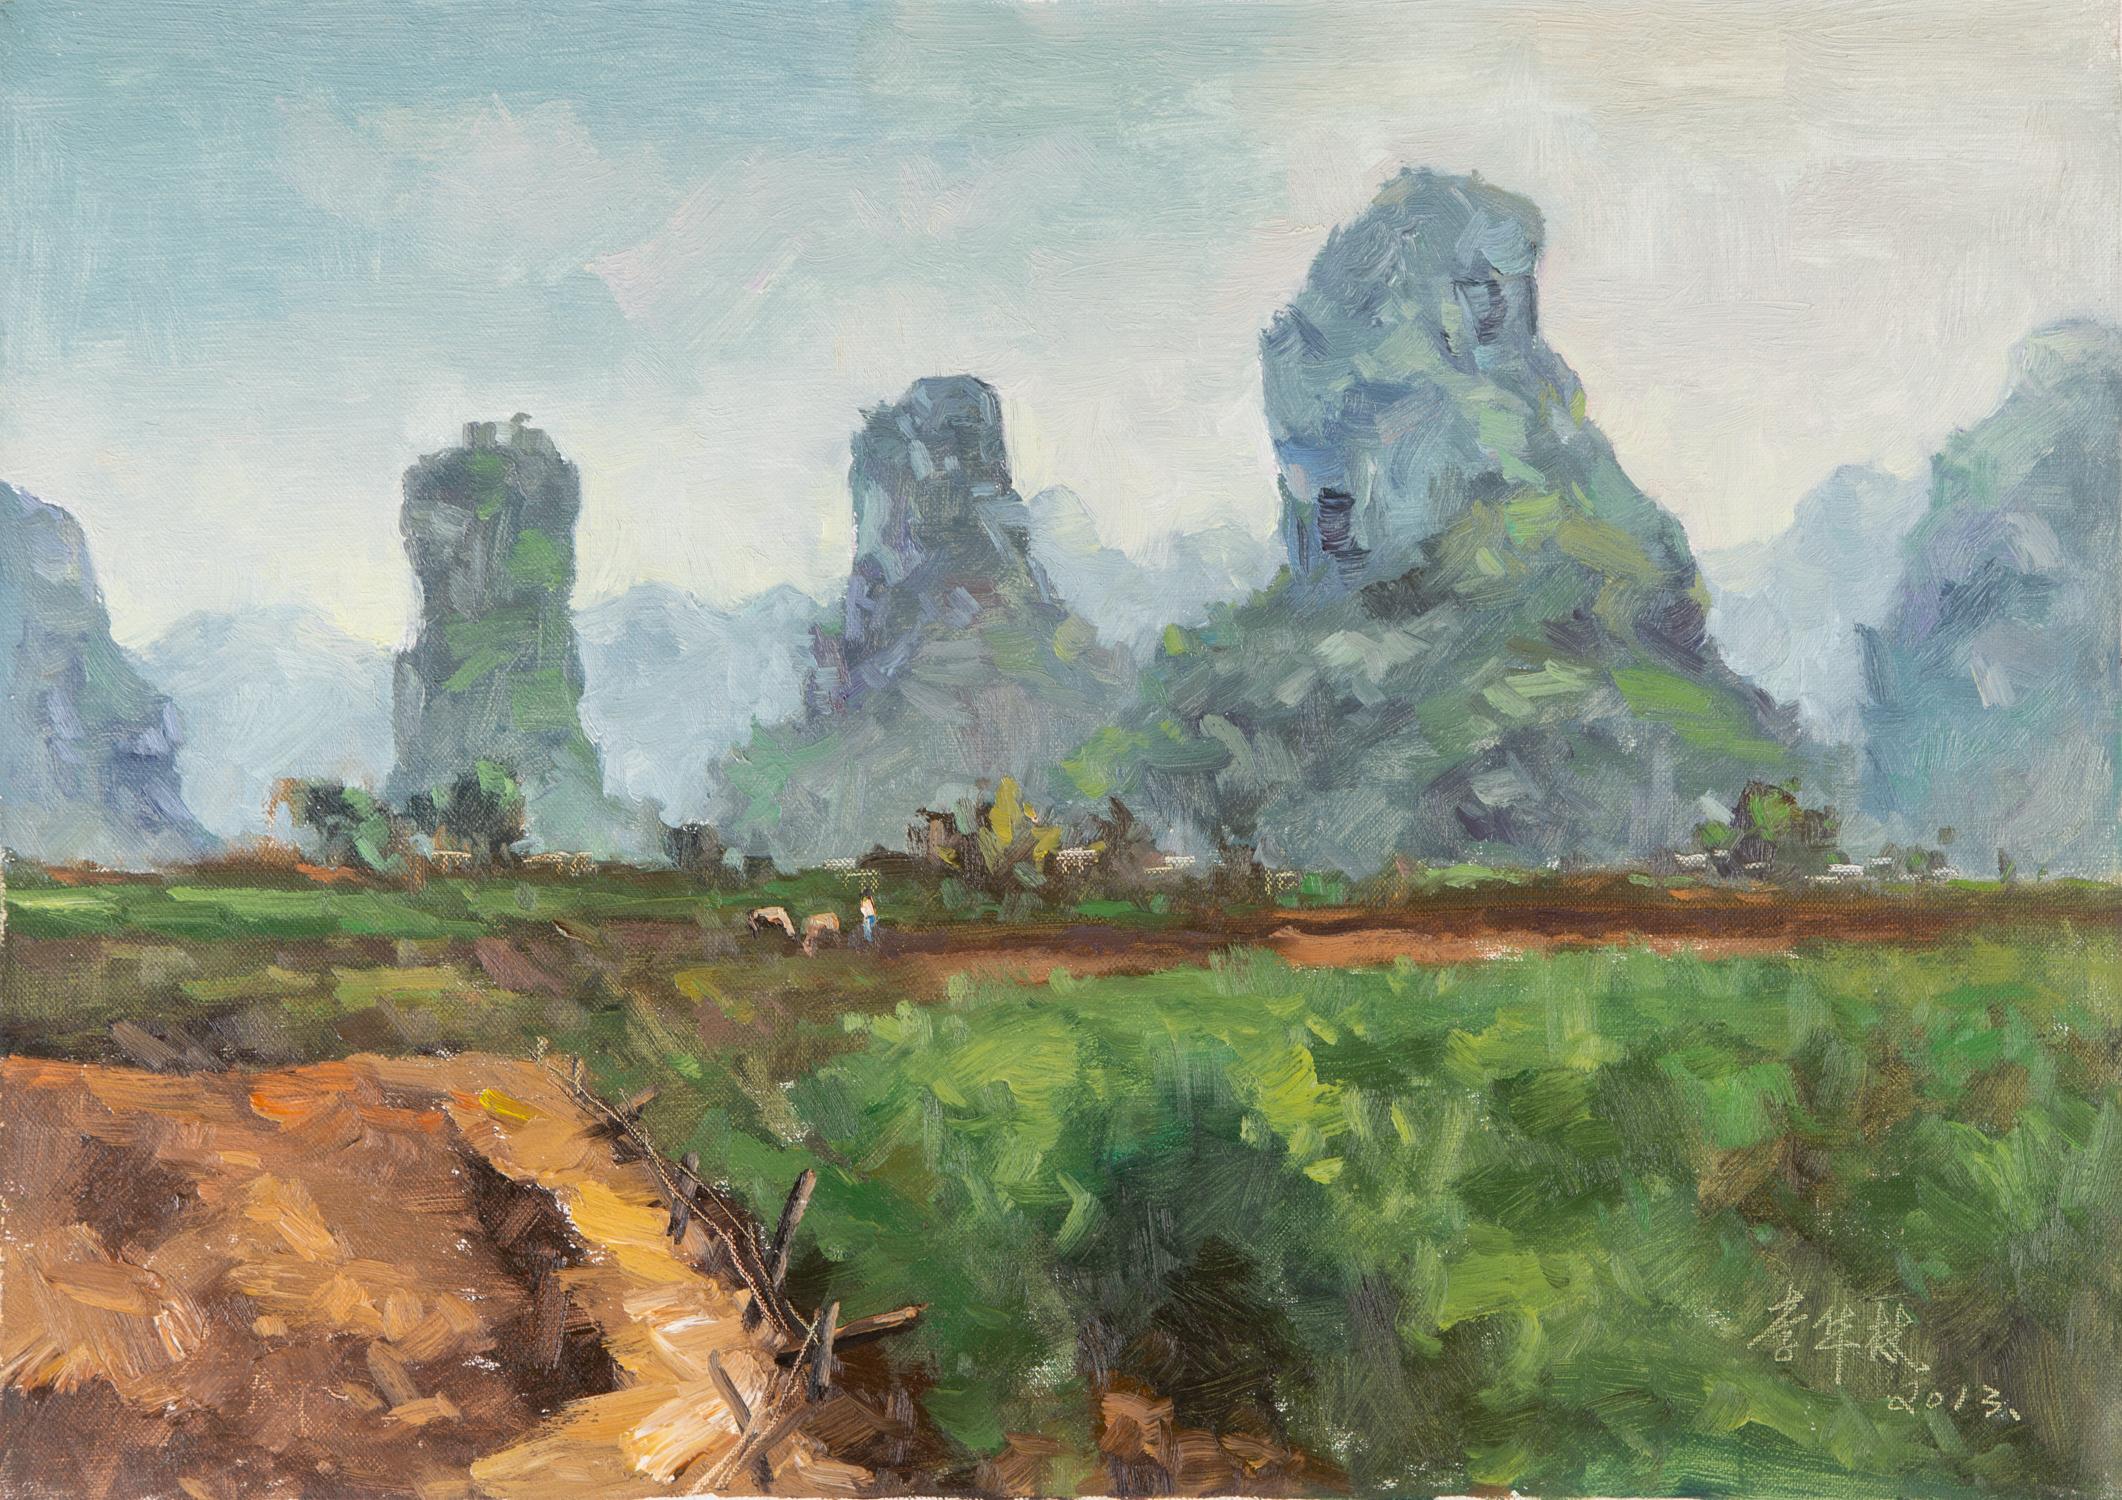  Title: Guilin View 3
 Medium: Oil on canvas
 Size: 27.5 x 19.5inches
 Frame: Framing options available!
 Age: 2000s
 Condition: Painting appears to be in excellent condition.
 Note: This painting is unstretched
 Artist: Hualin Li
 Provenance: